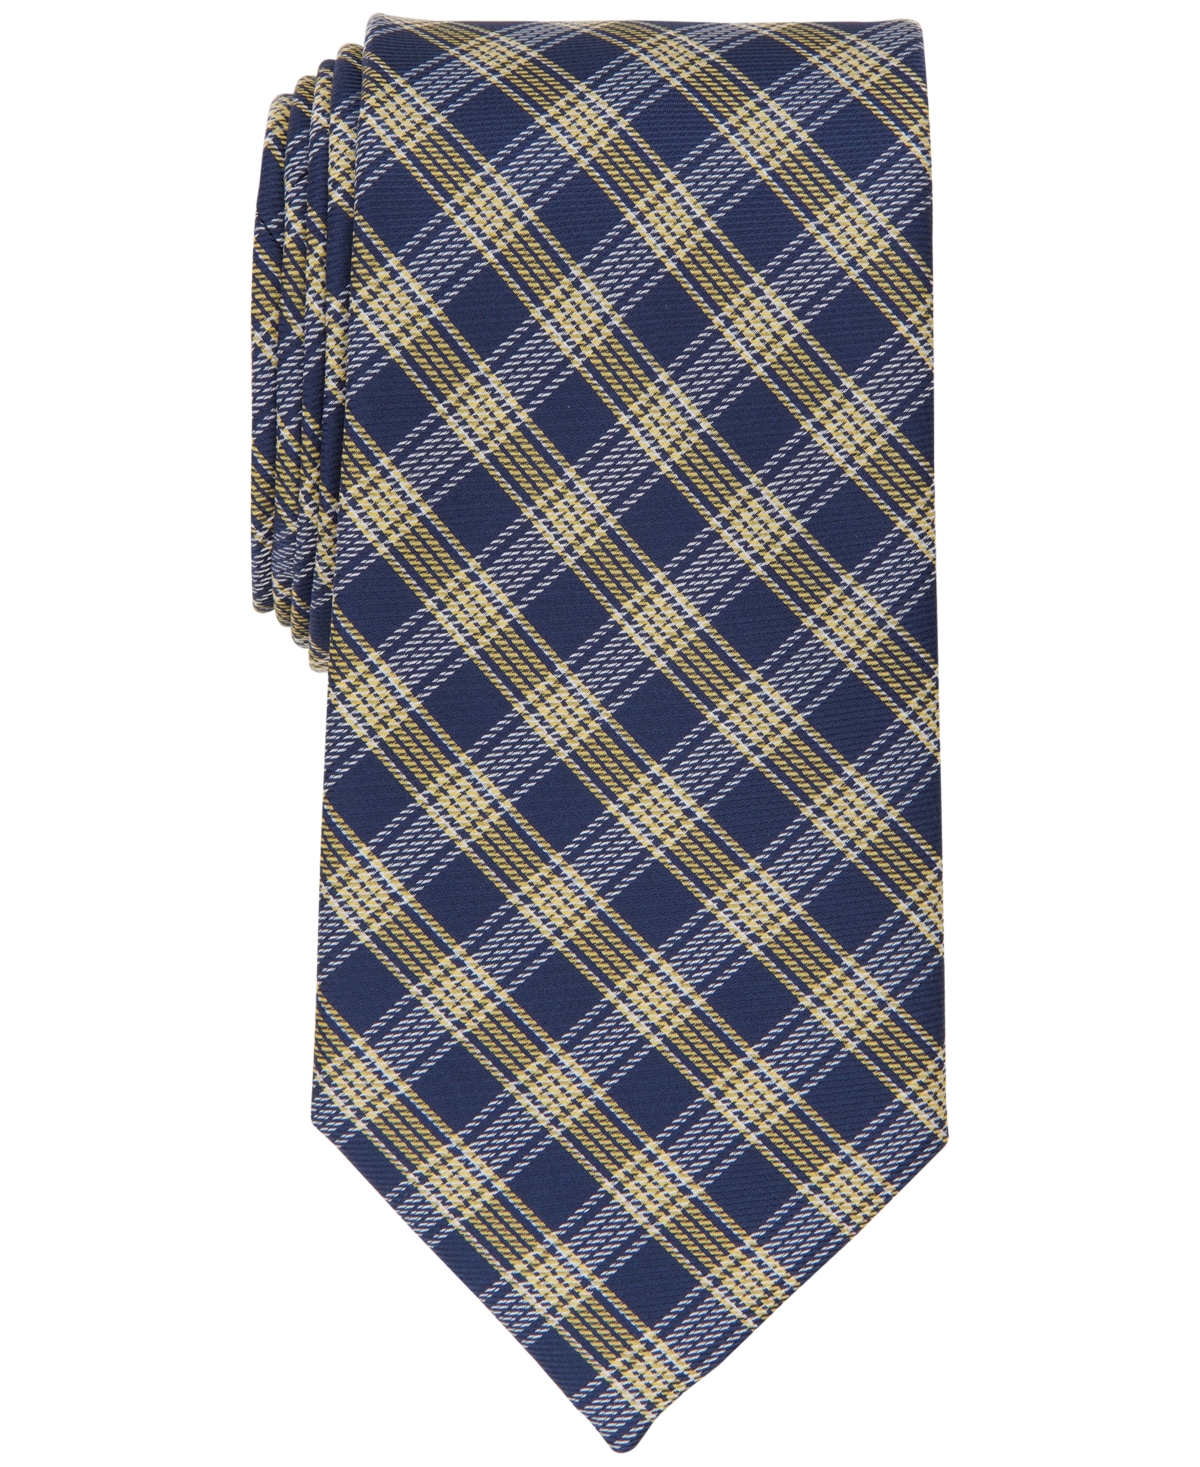 Men's Cates Plaid Tie, Created for Macy's - Yellow